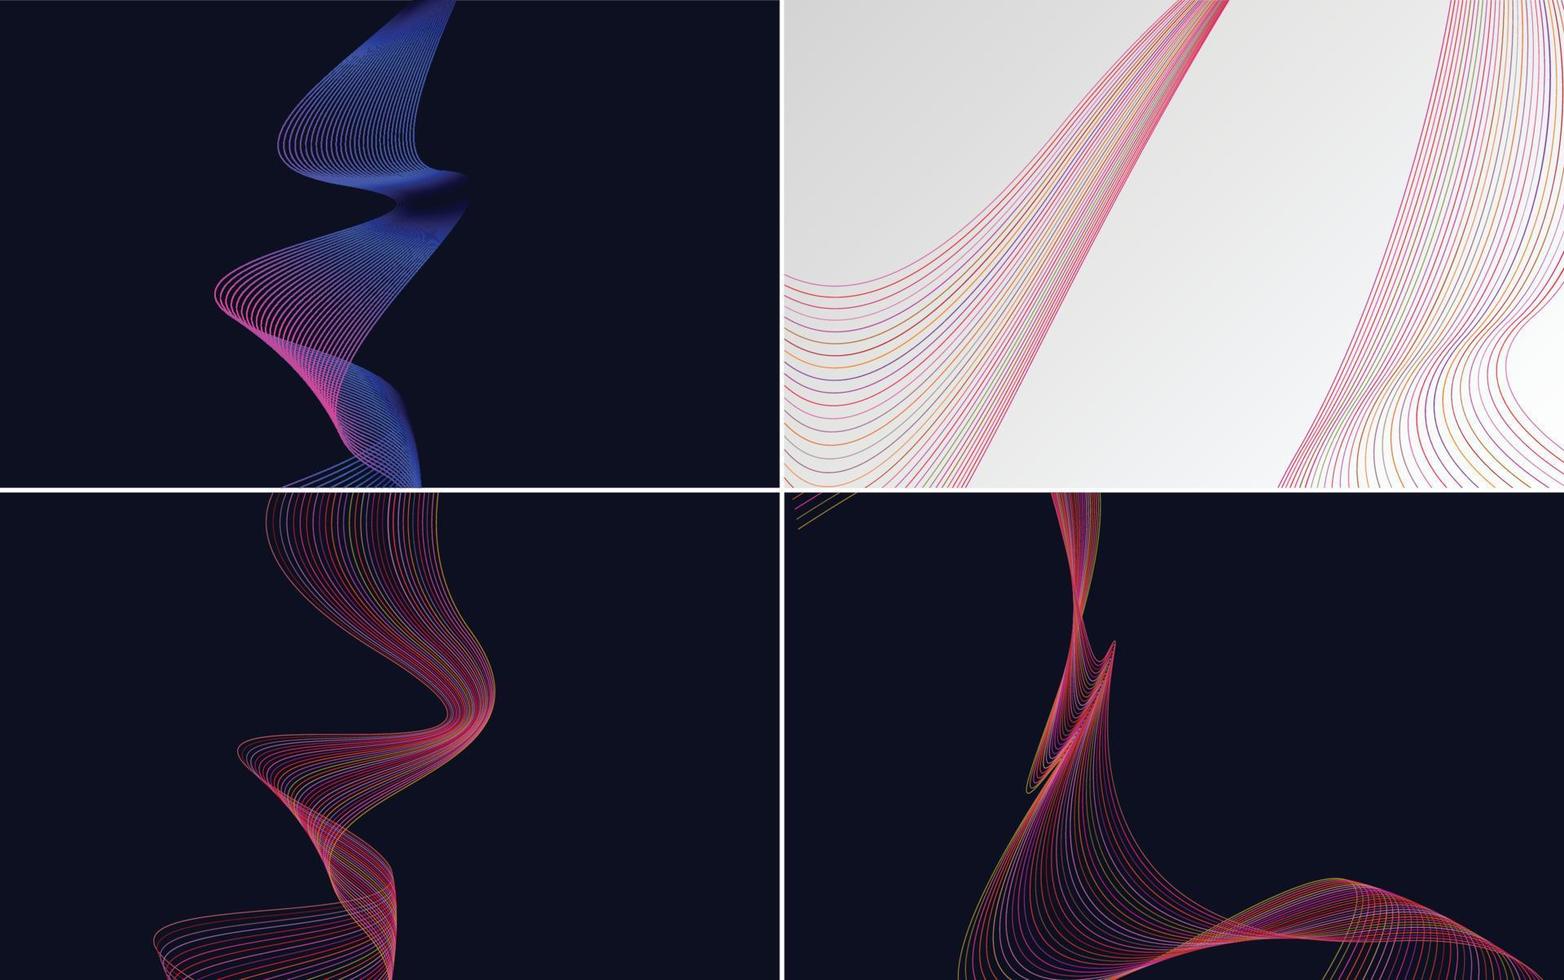 Add texture to your designs with this set of 4 vector backgrounds